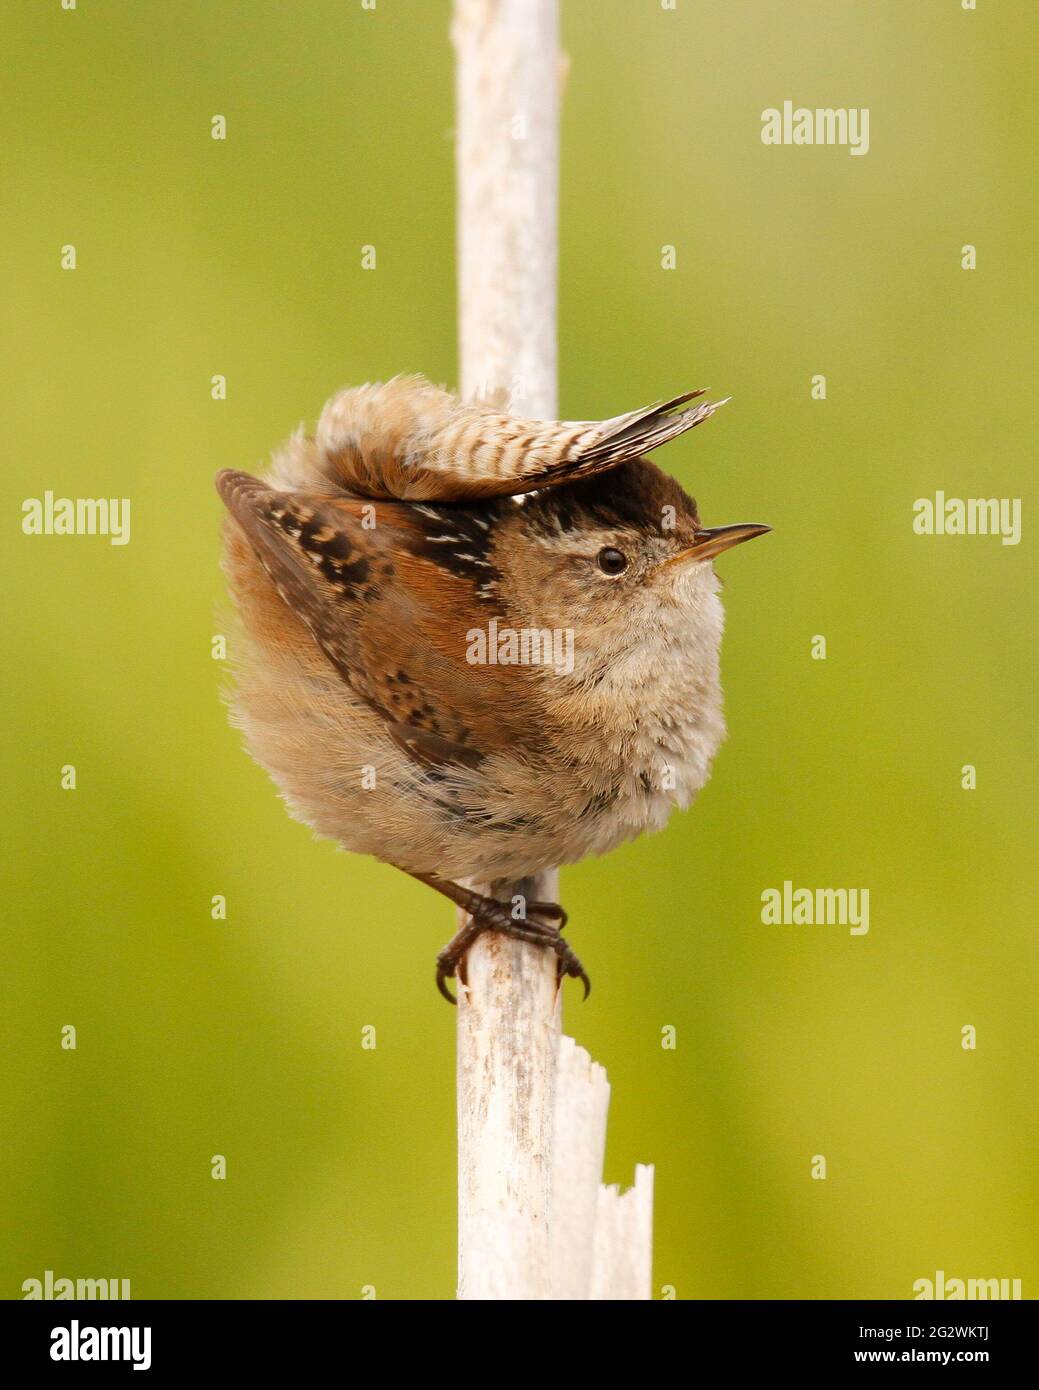 A Marsh Wren (Cistothorus palustris) flips its tail behind its back and over its head while sitting on a dried reed in Victoria, BC, Canada. Stock Photo